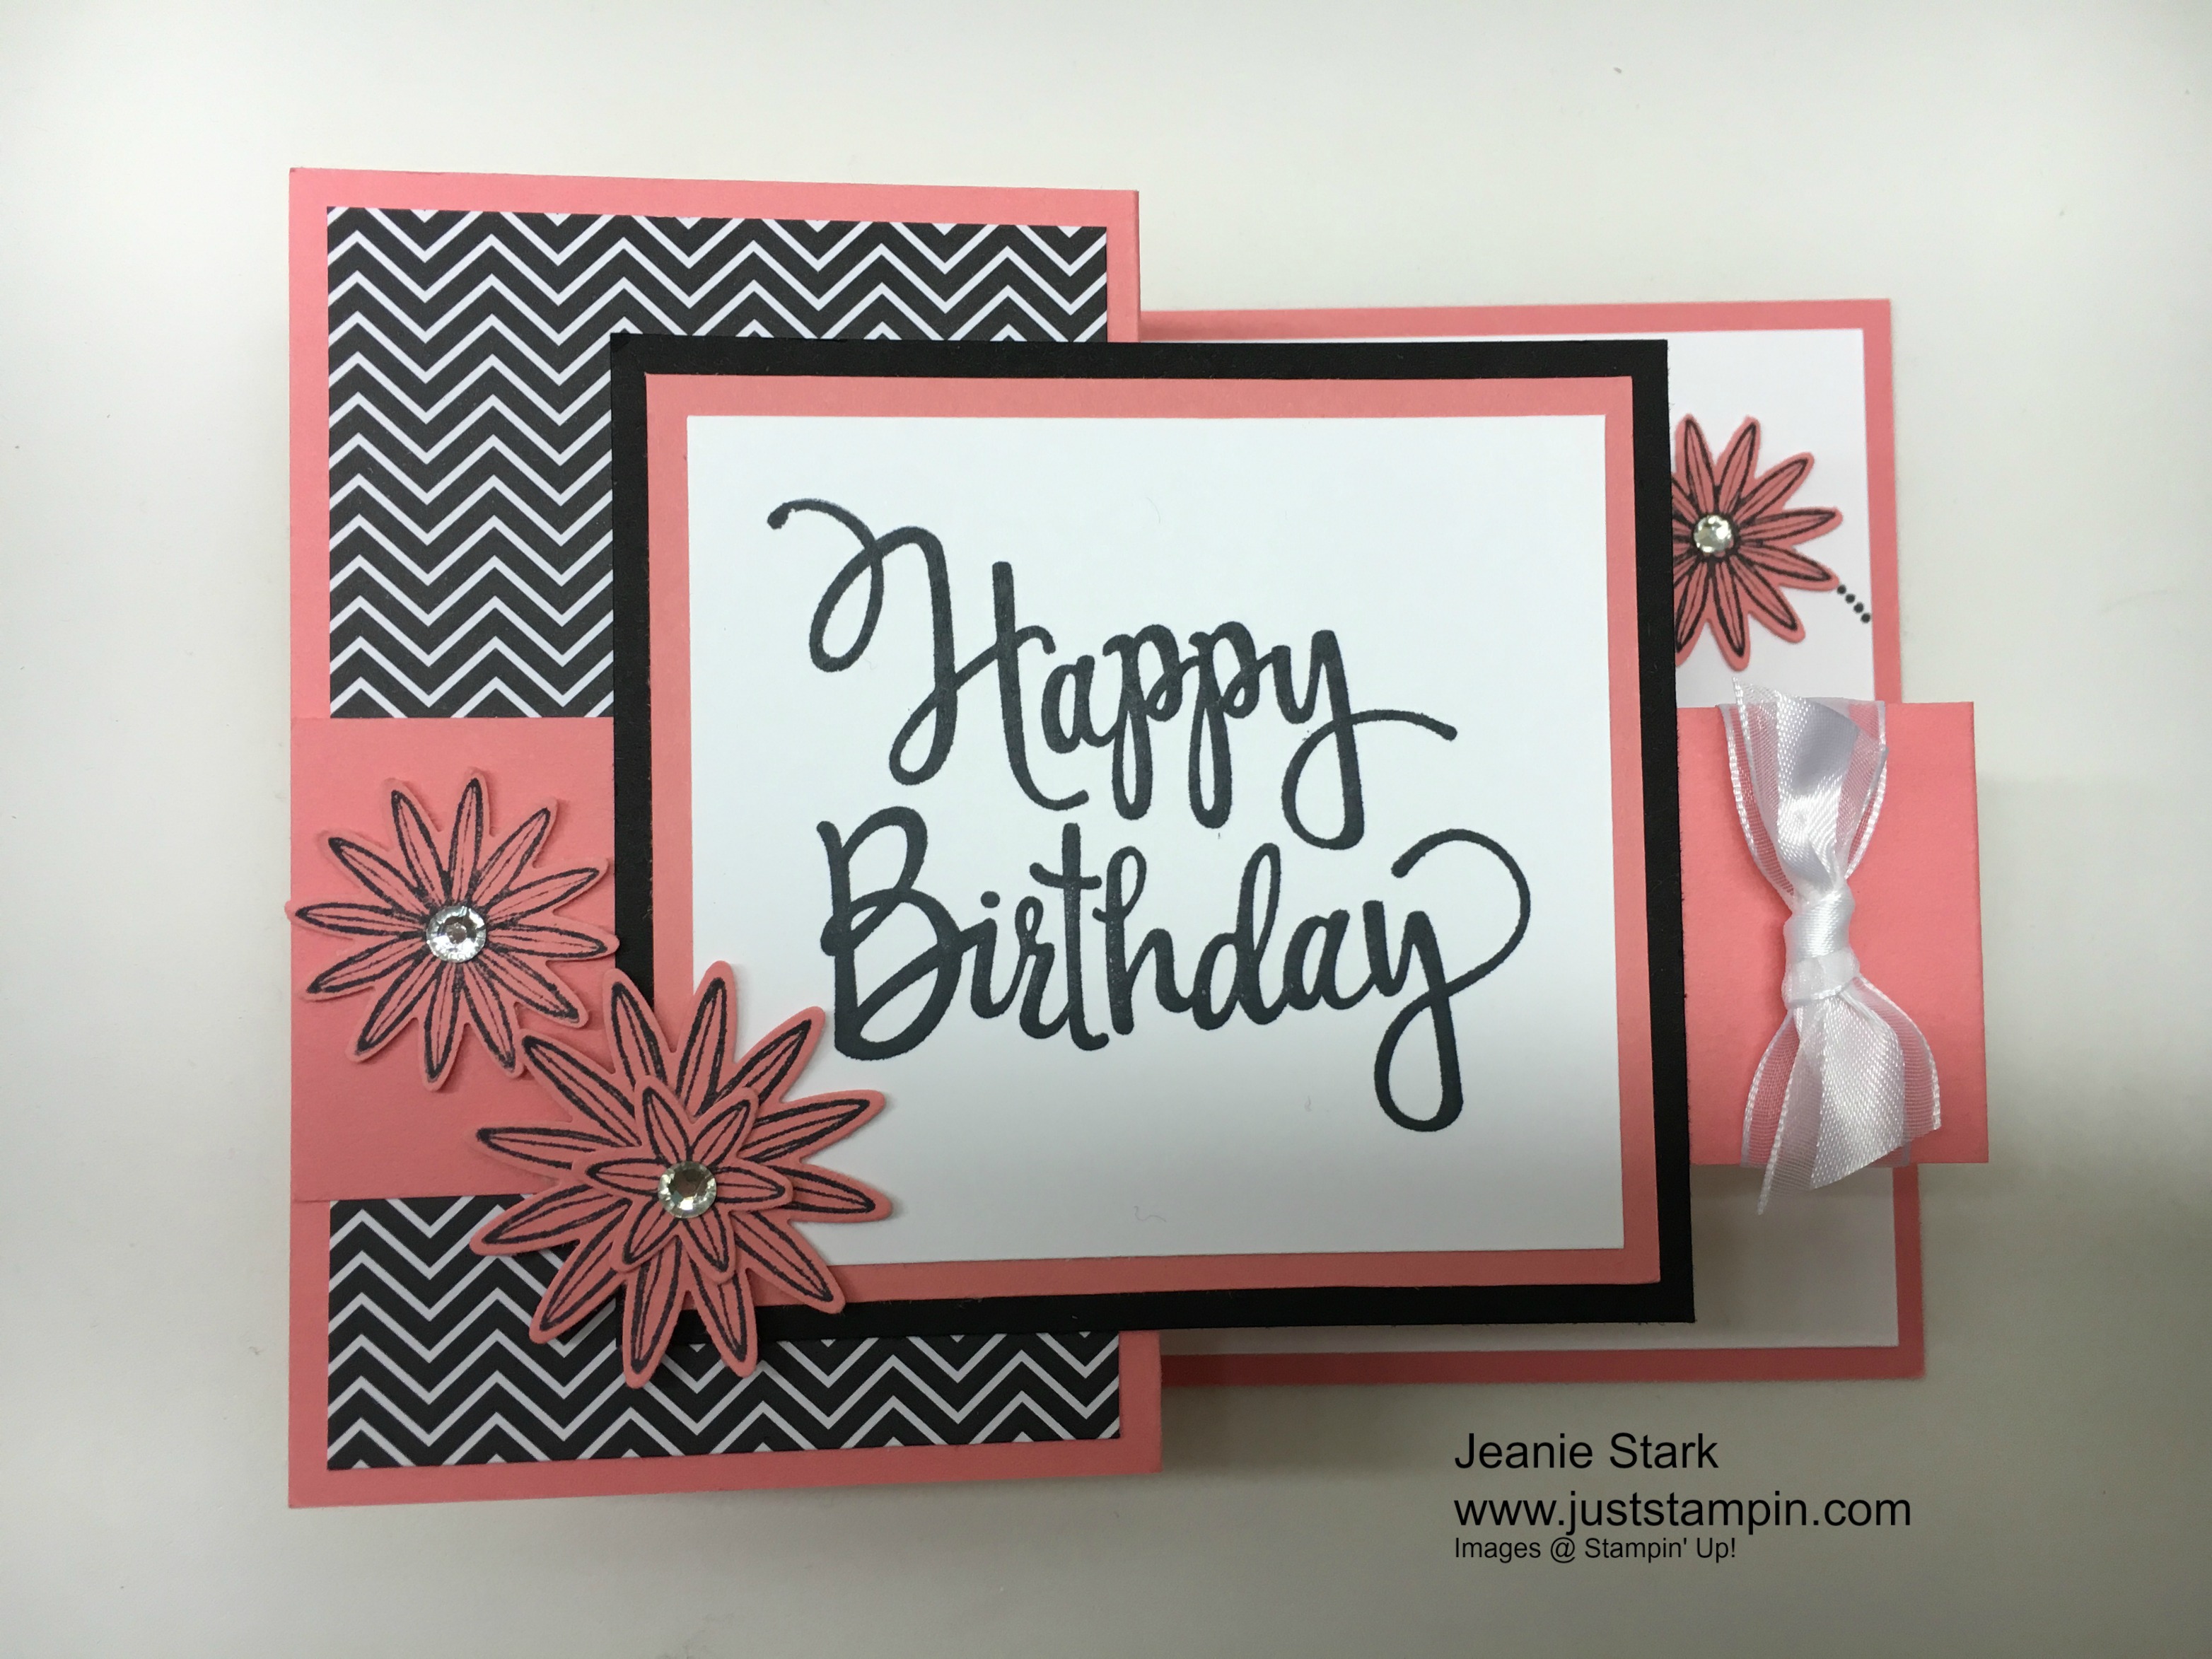 Stampin Up Stylized Birthday fun fold card idea using the Blossom Bunch Punch - Jeanie Stark StampinUp